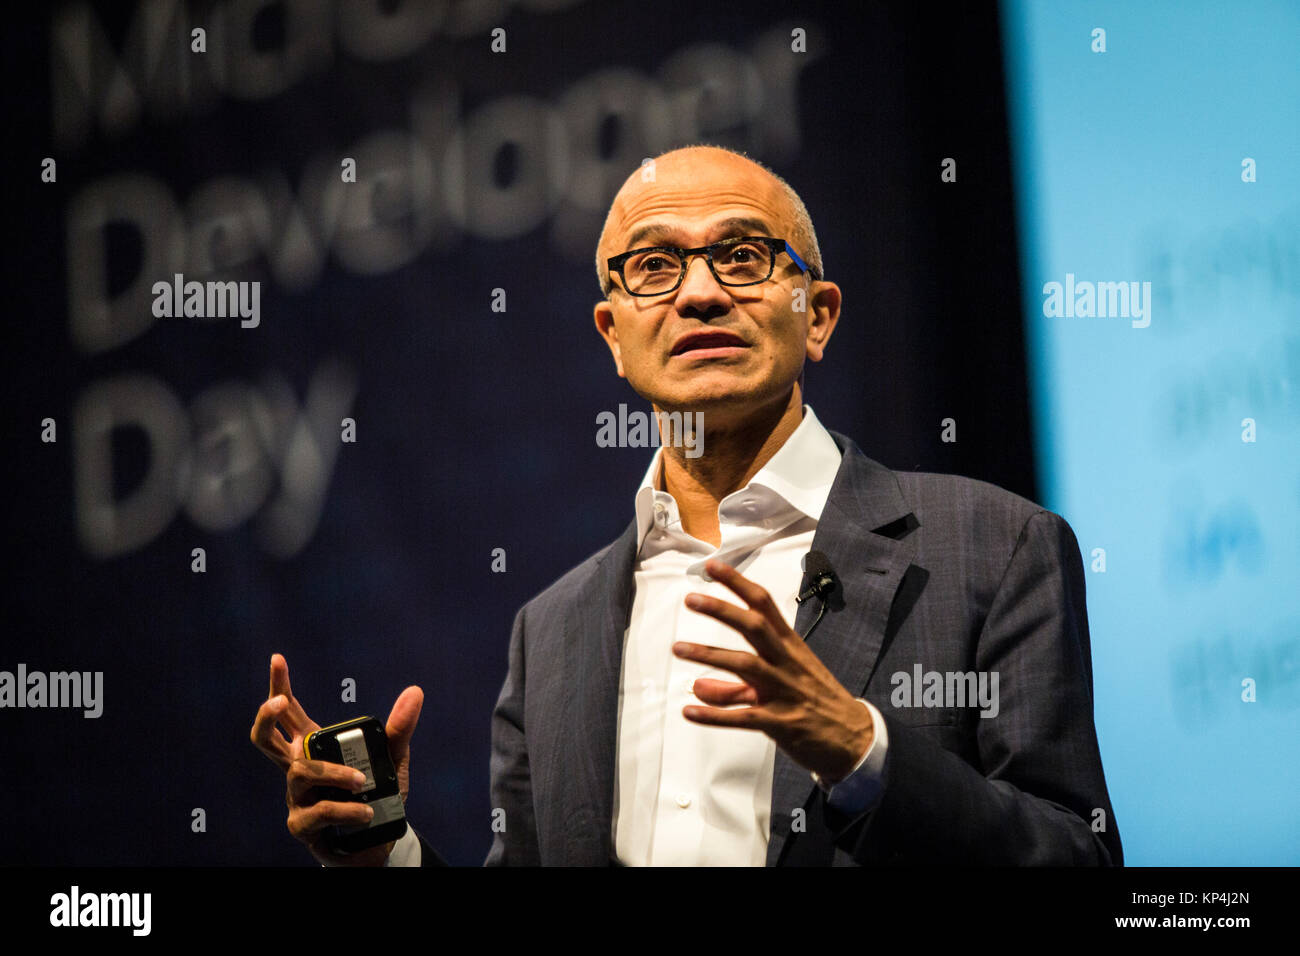 Satya Nadella, chief executive officer of Microsoft Corp., speaks during the opening keynote session at the Microsoft Developer Day in Singapore, May 27, 2016. Stock Photo